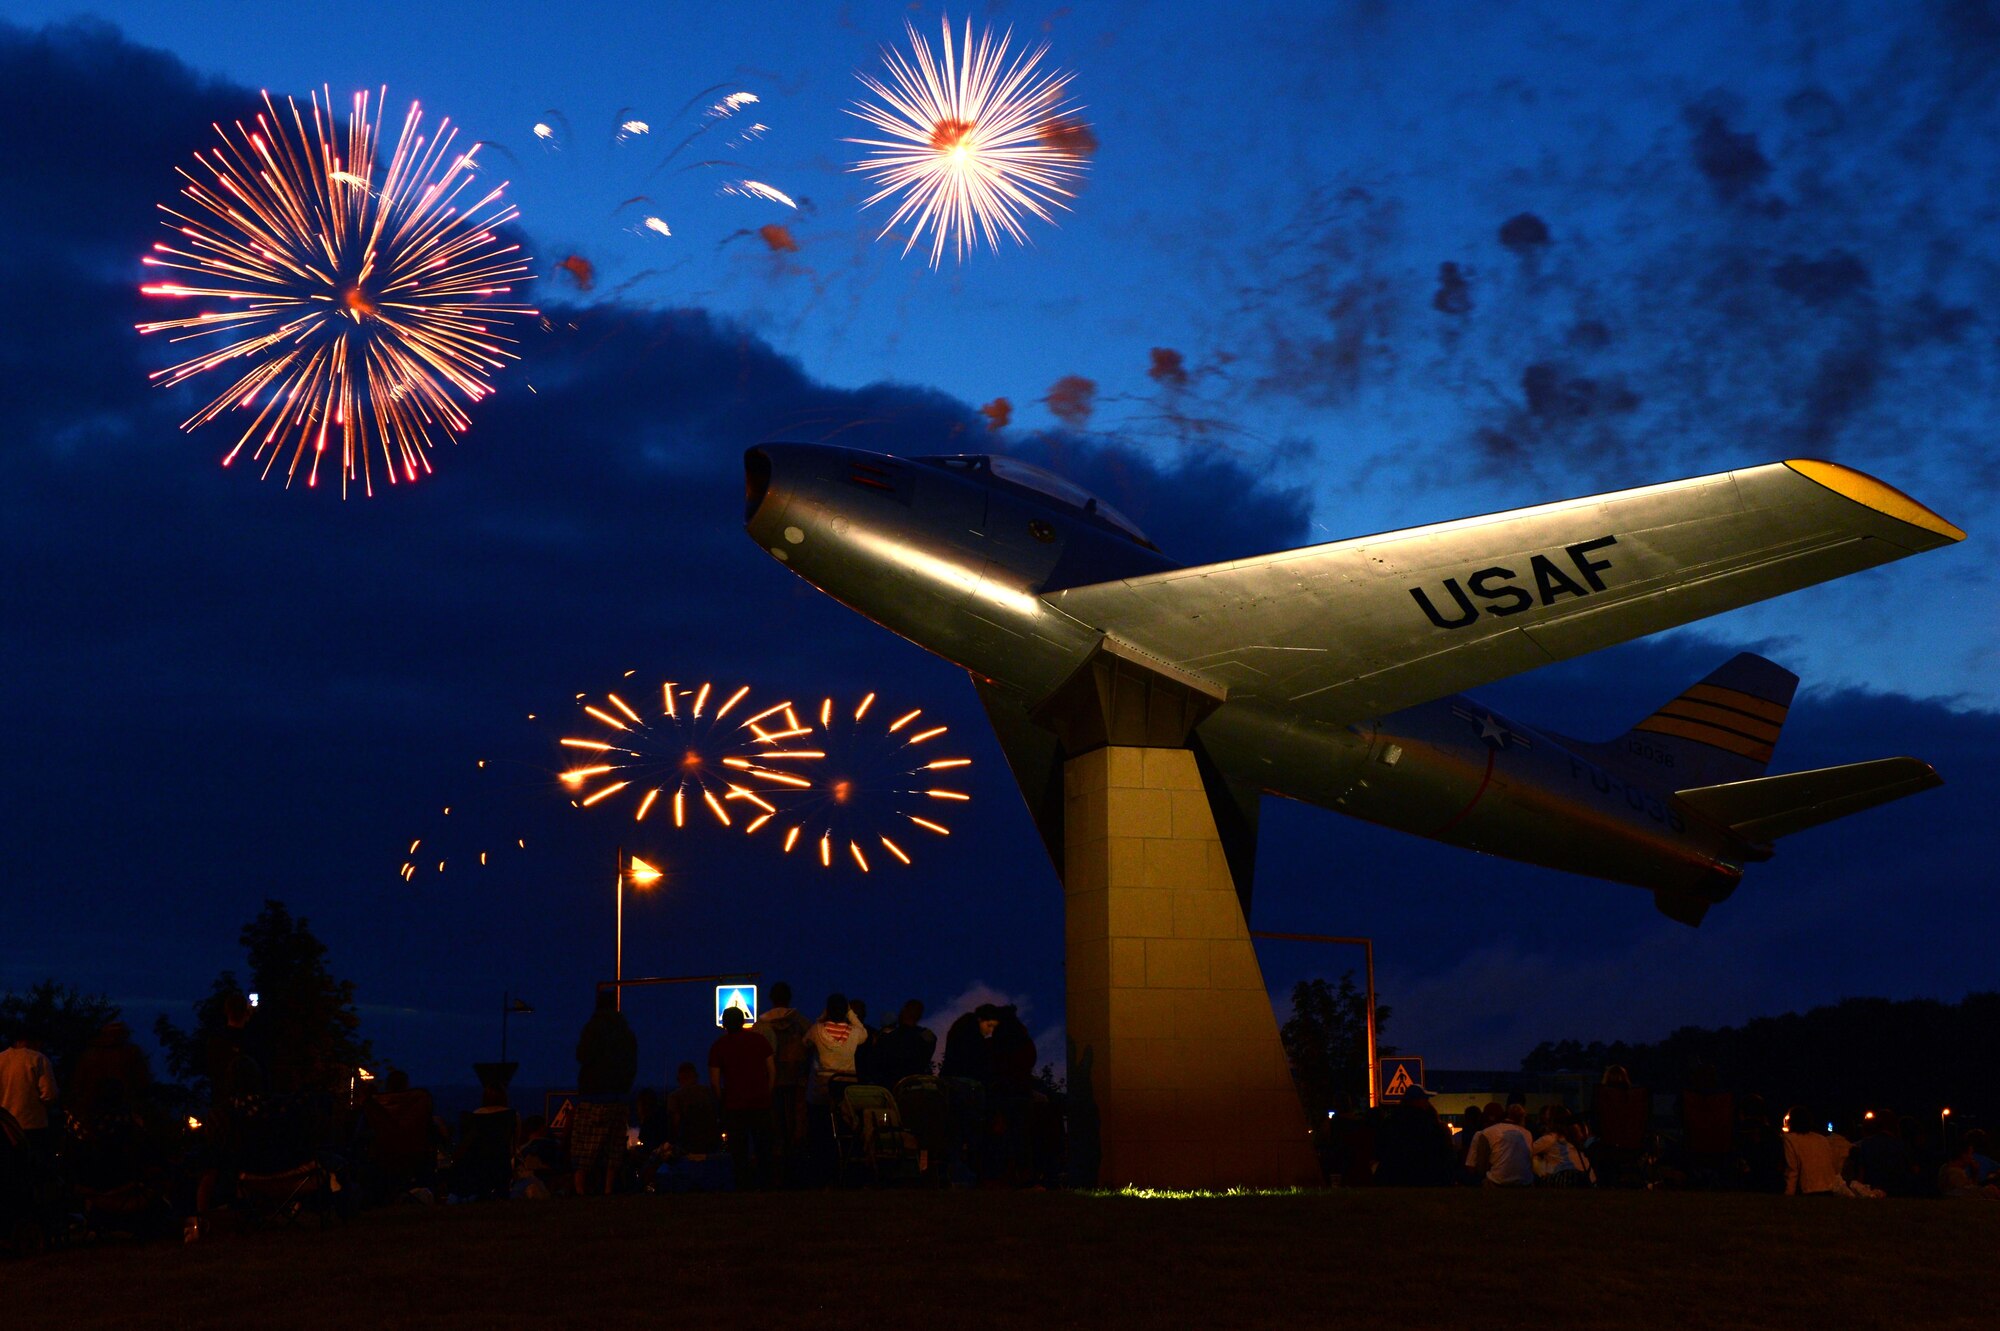 SPANGDAHLEM AIR BASE, Germany – Fireworks explode over Spangdahlem AB July 4, 2013. Community members gather to appreciate Sabers and close out the Super Saber Appreciation Day celebration. (U.S. Air Force photo by Airman 1st Class Kyle Gese/Released)